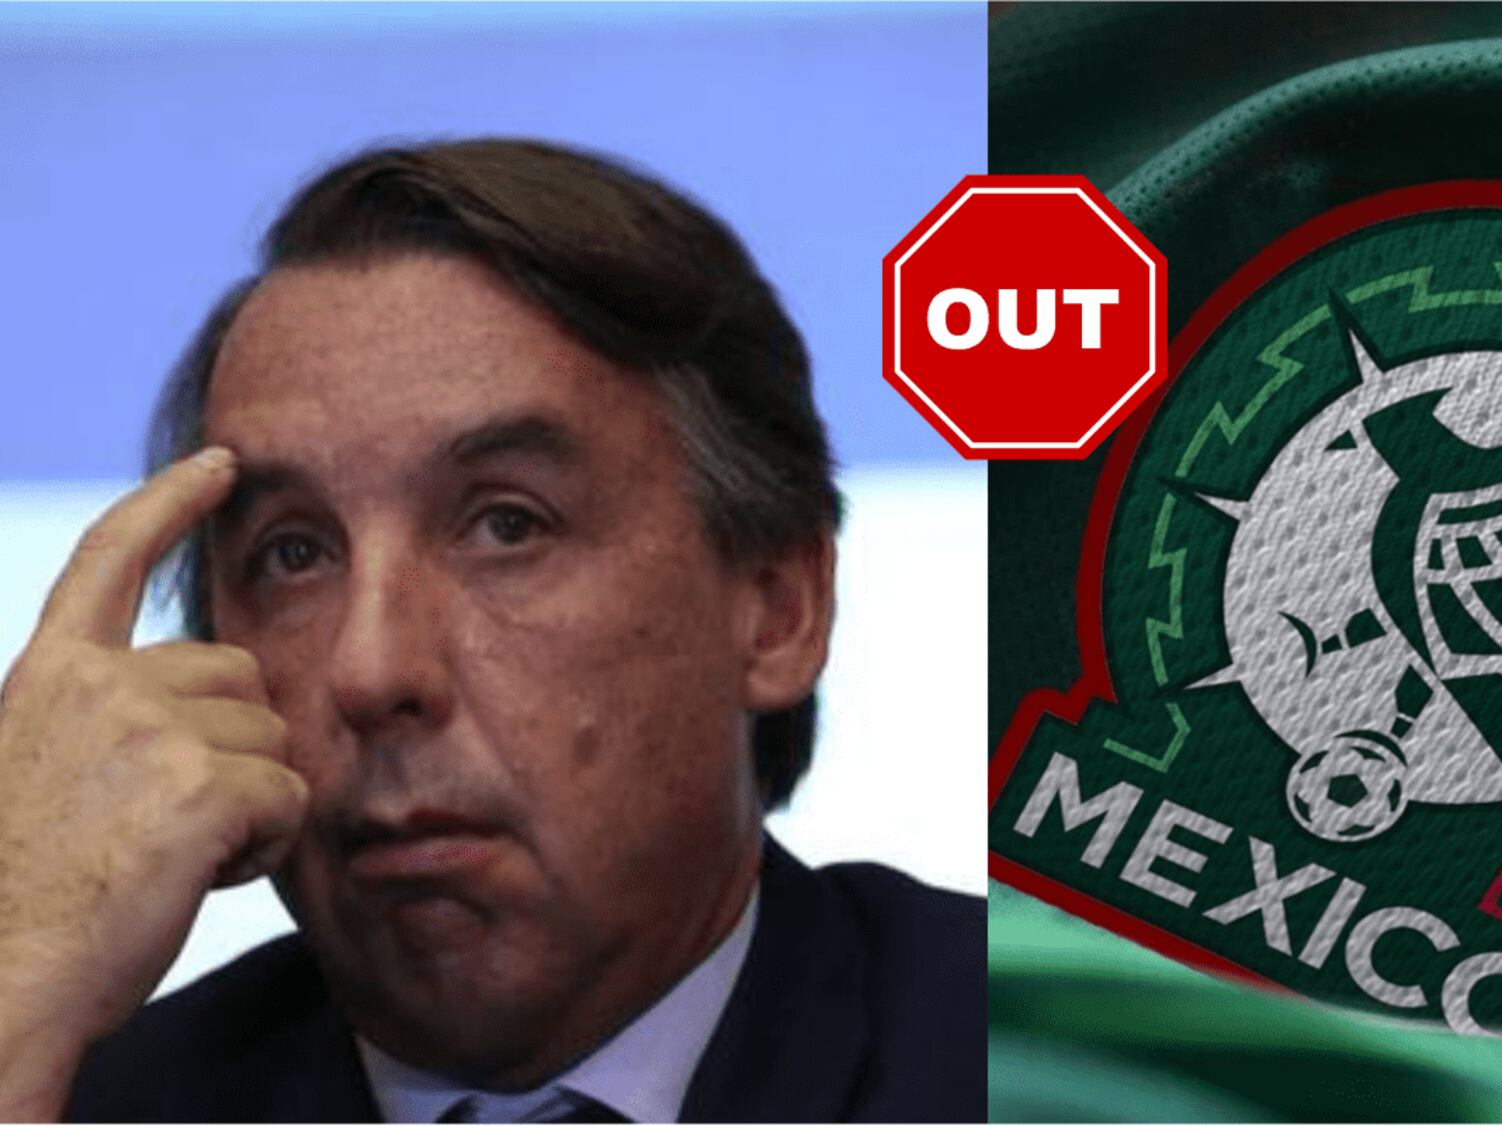 Two months before Qatar 2022, a major Mexican television station vetoes a player from El Tri, all for its own interests